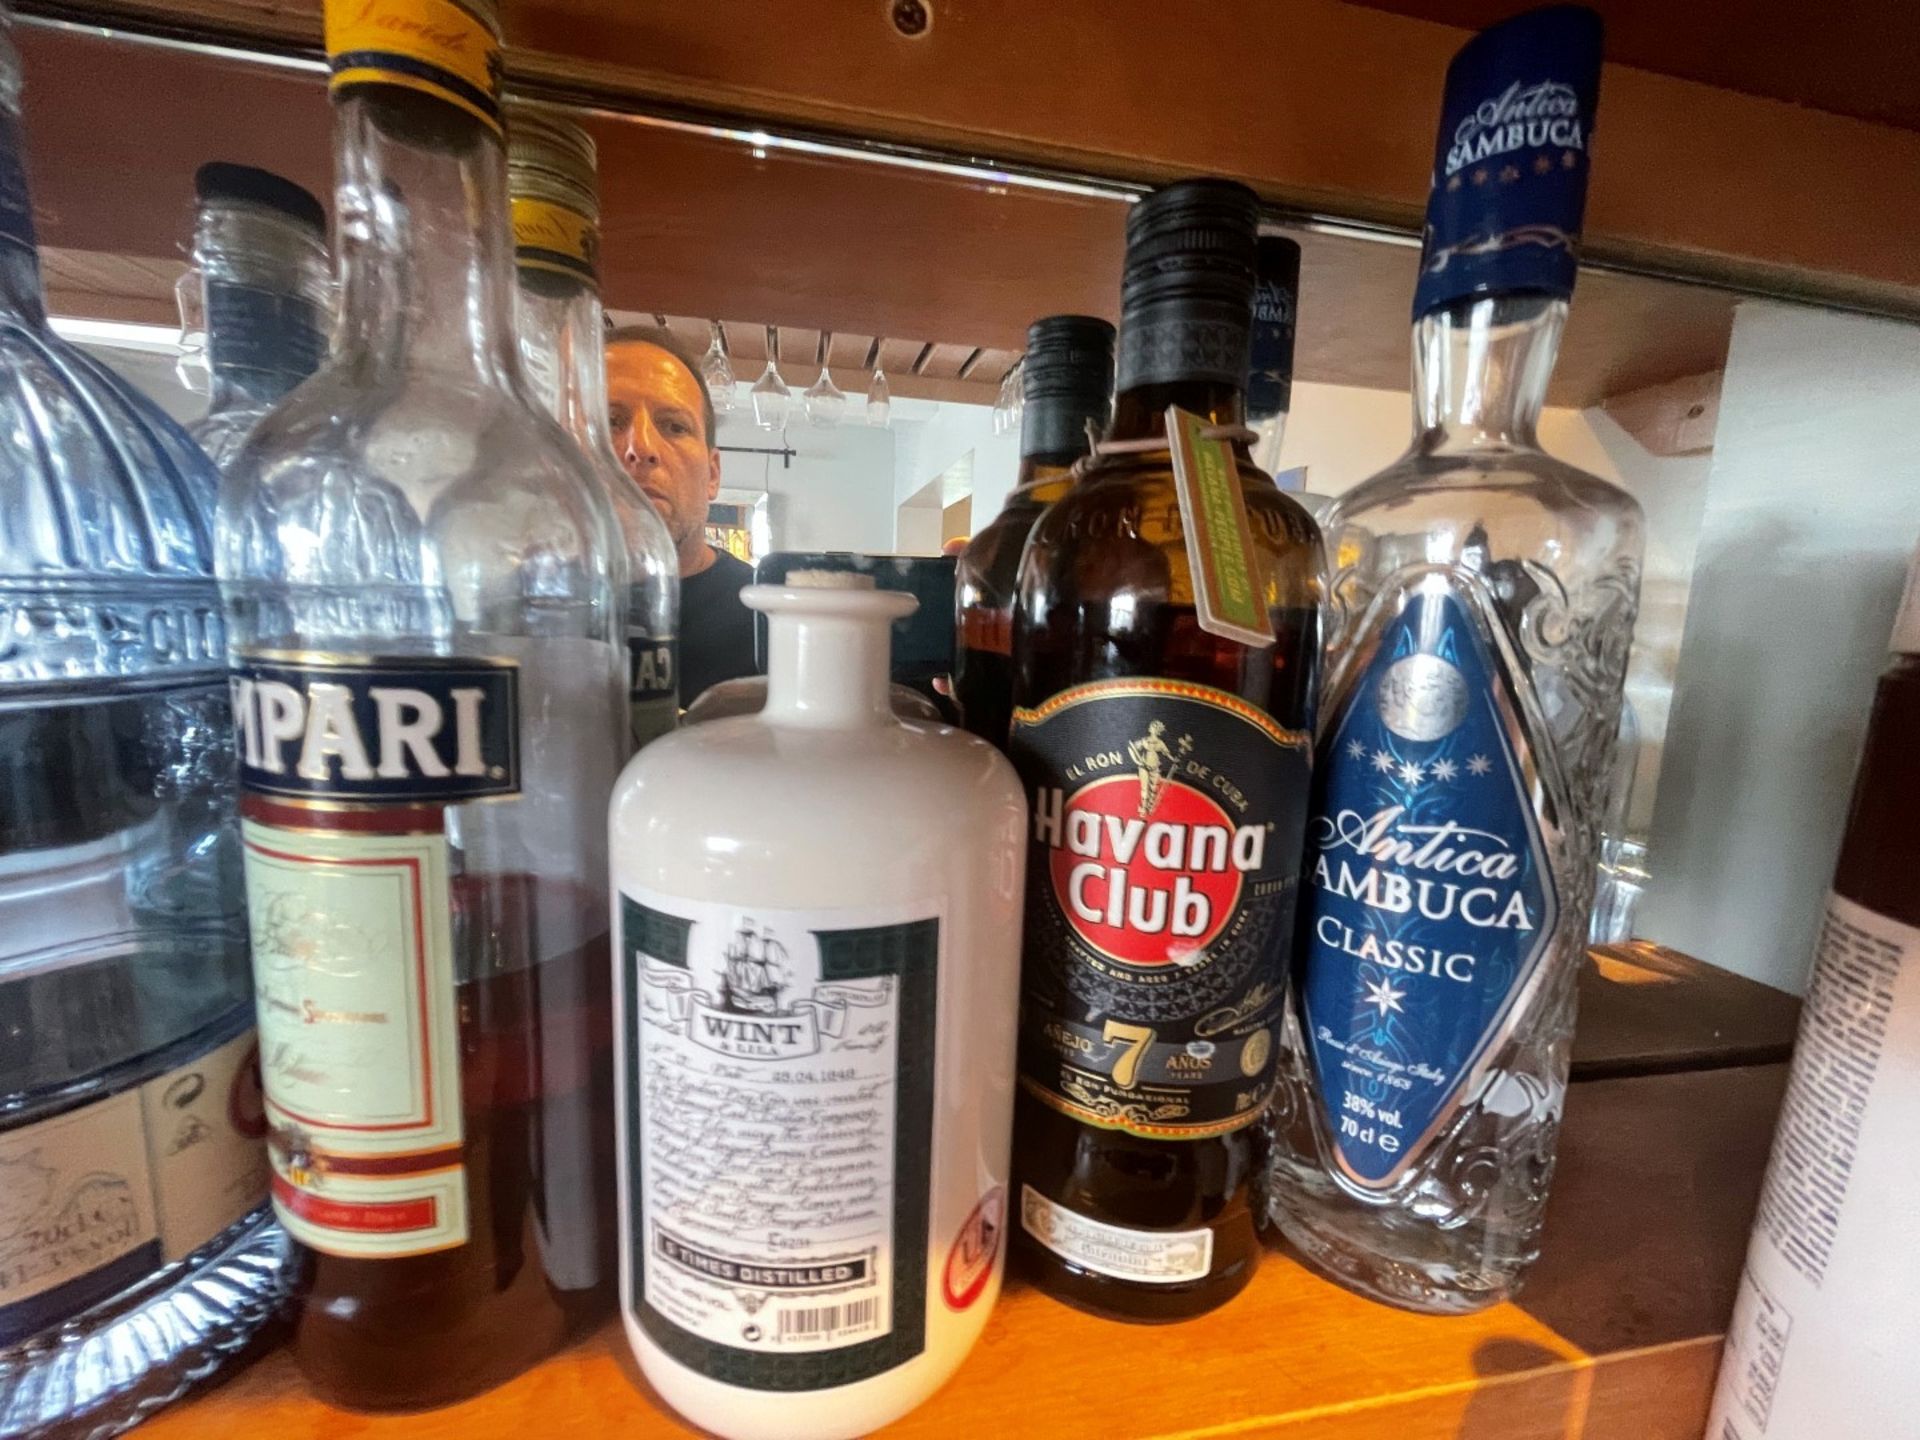 13 x Bottles of Various Spirits Including Sambuca, Vodka, Whisky, Gin, Rum and More - Part Used Open - Image 3 of 14